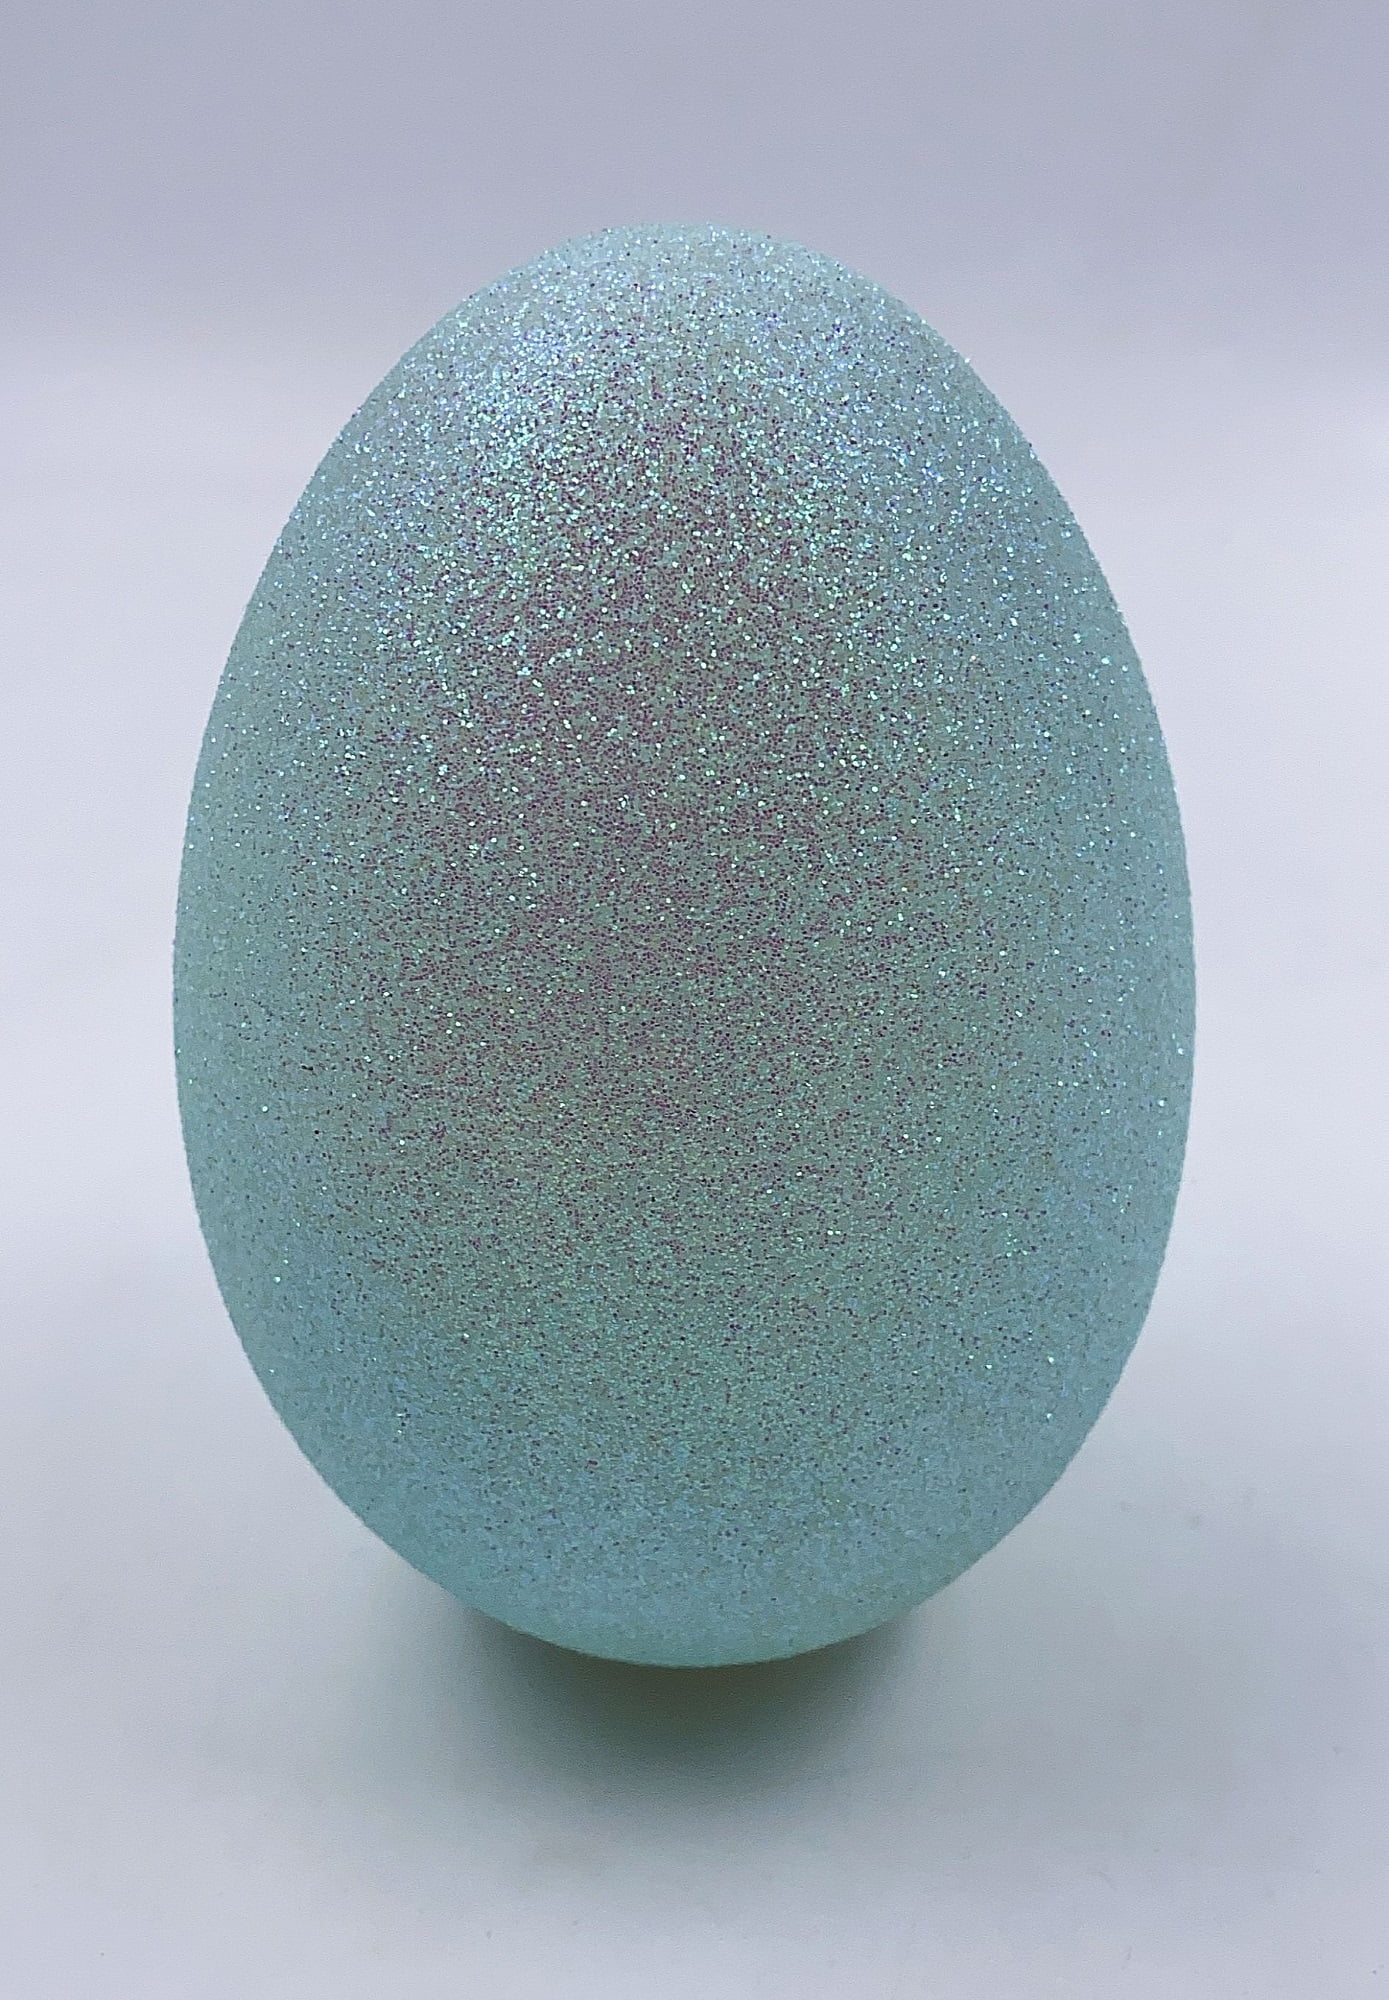 Way To Celebrate Easter 5-inch Height Blue Glitter Plastic Egg Indoor Decor